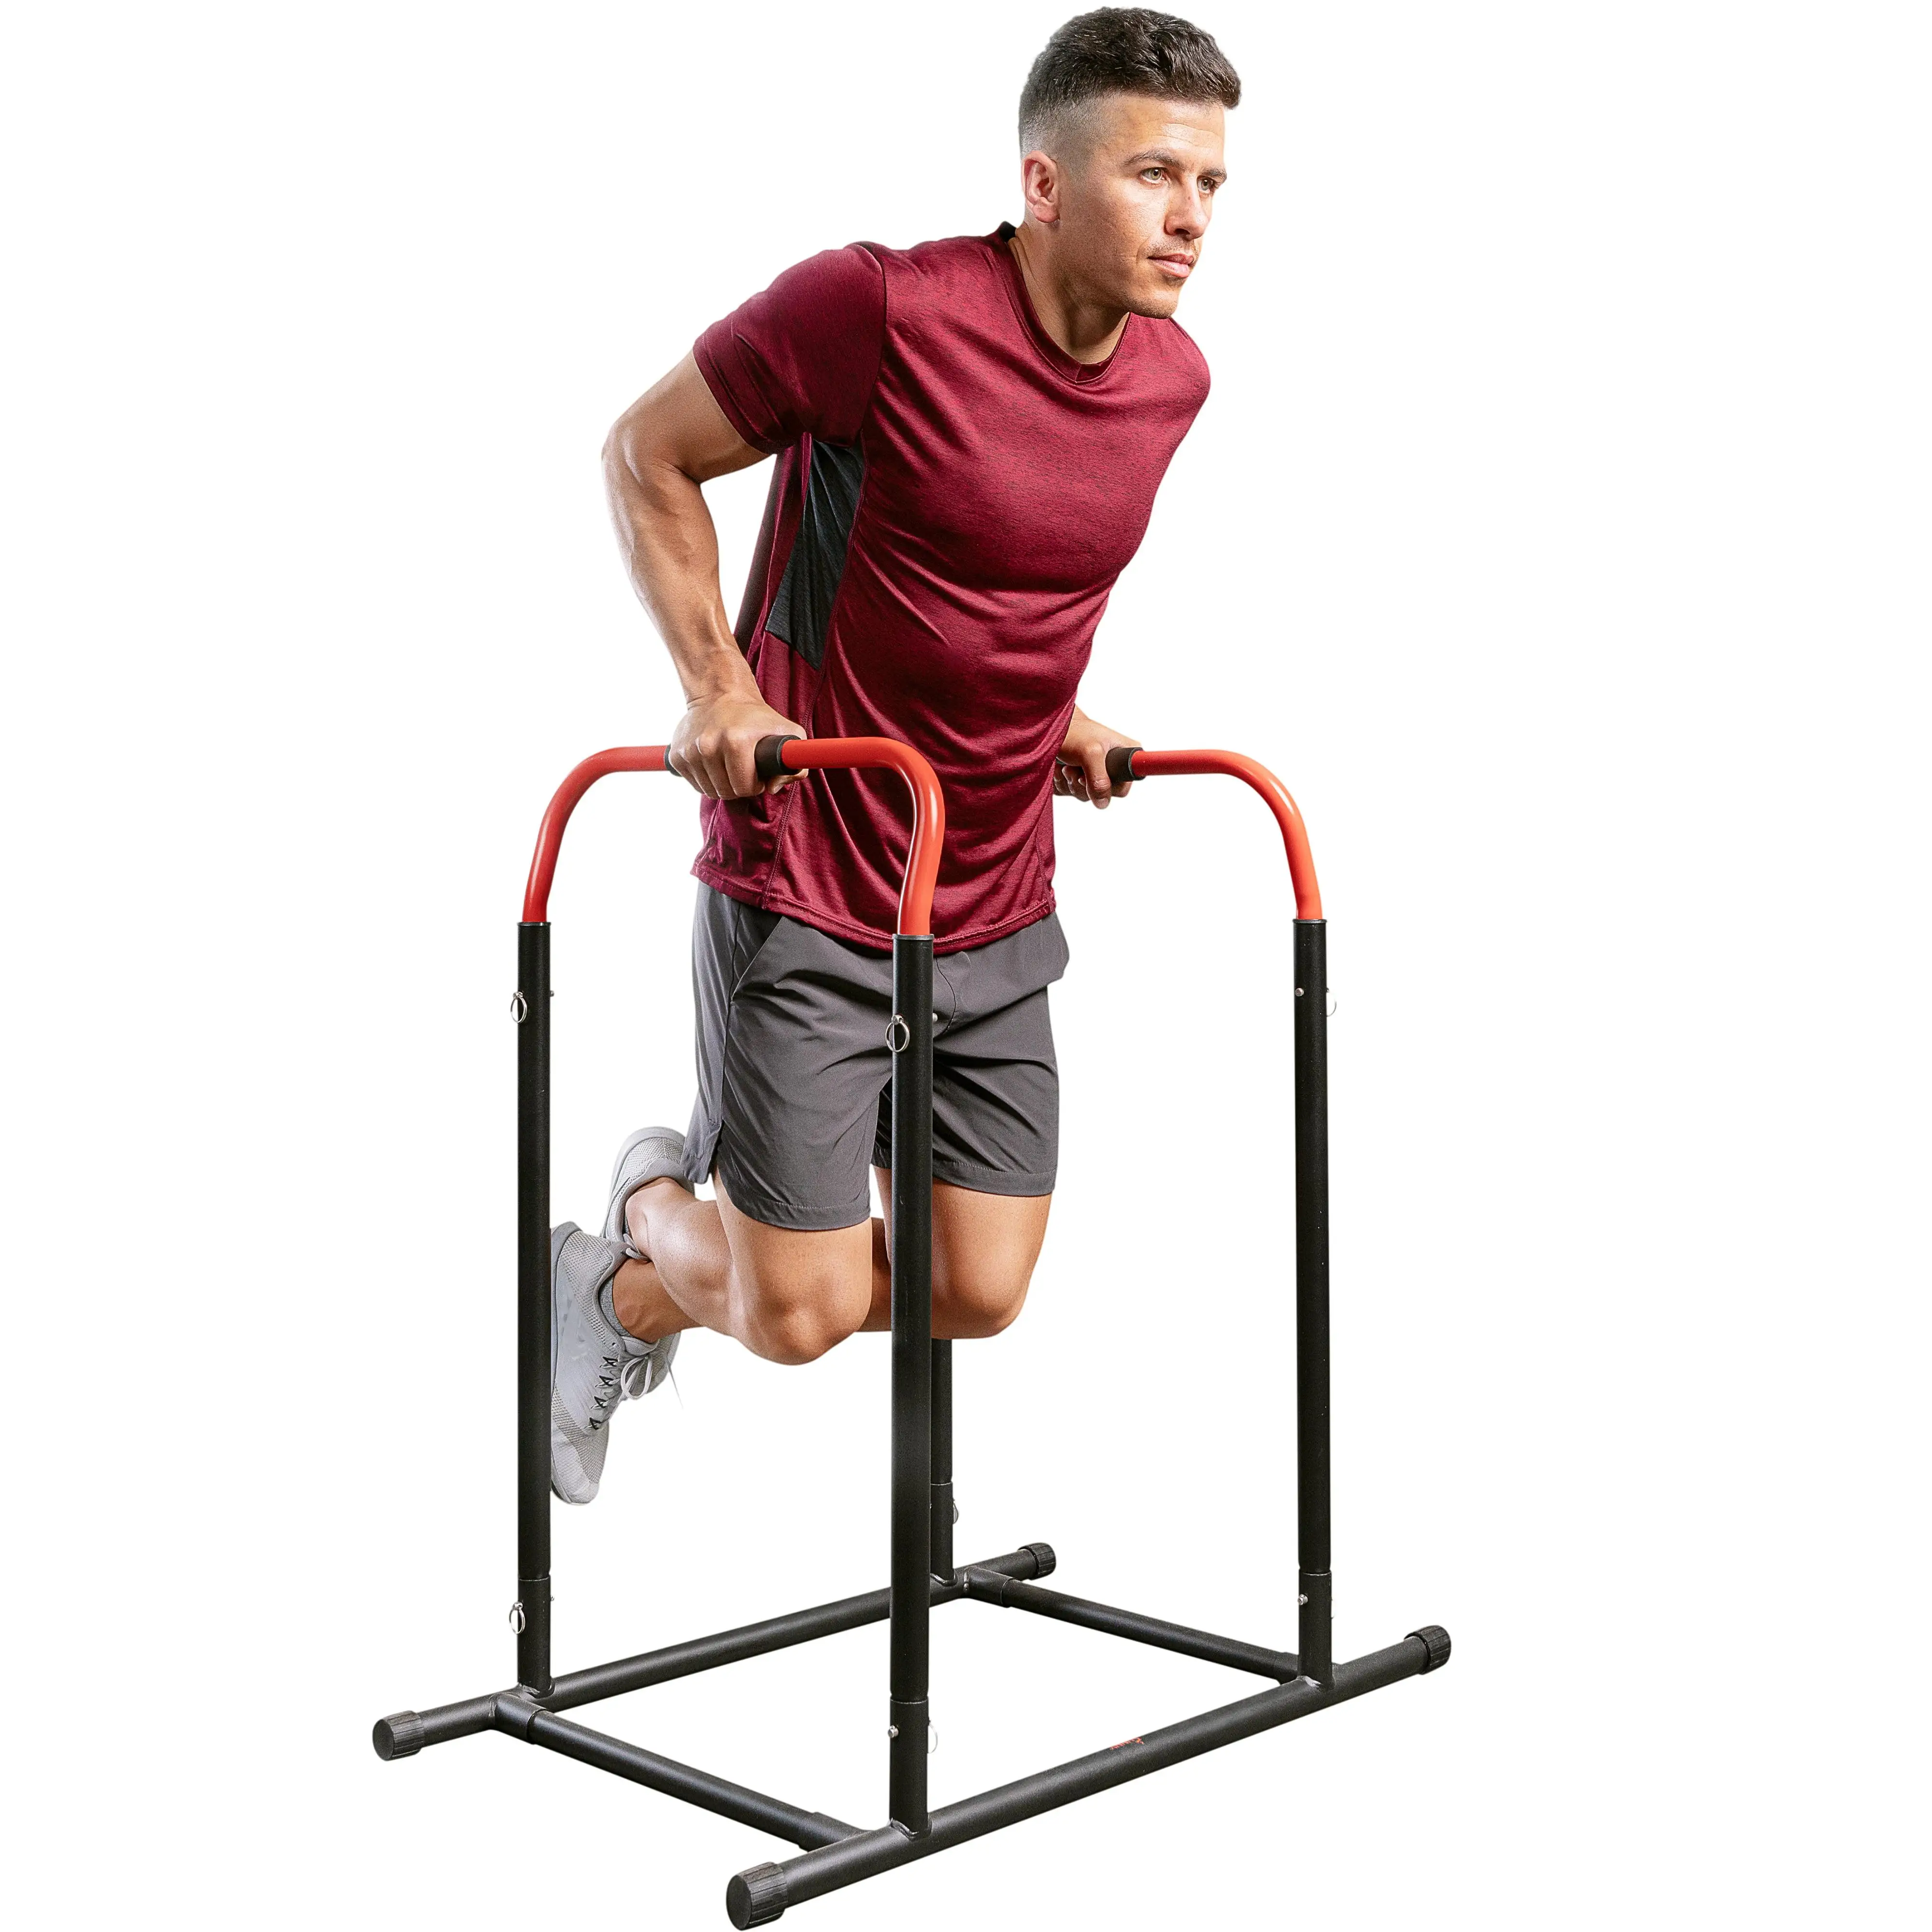 

Adjustable Dip Bar Workout Station, Ab Lounge Machine - Core Exercise Equipment for Stomach, SF-XF9937